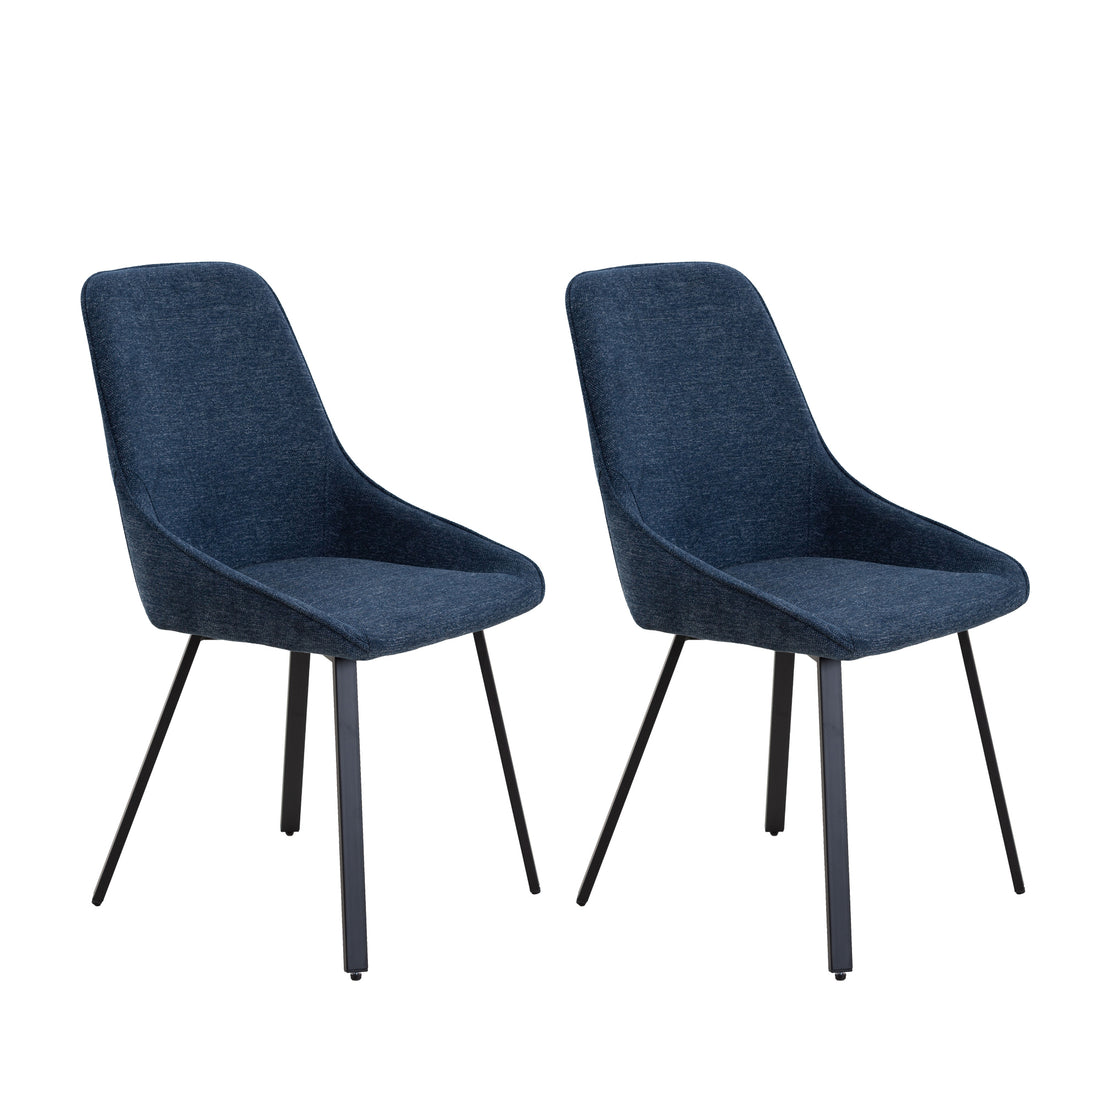 Dining Chairs Set Of 2, Upholstered Side Chairs -